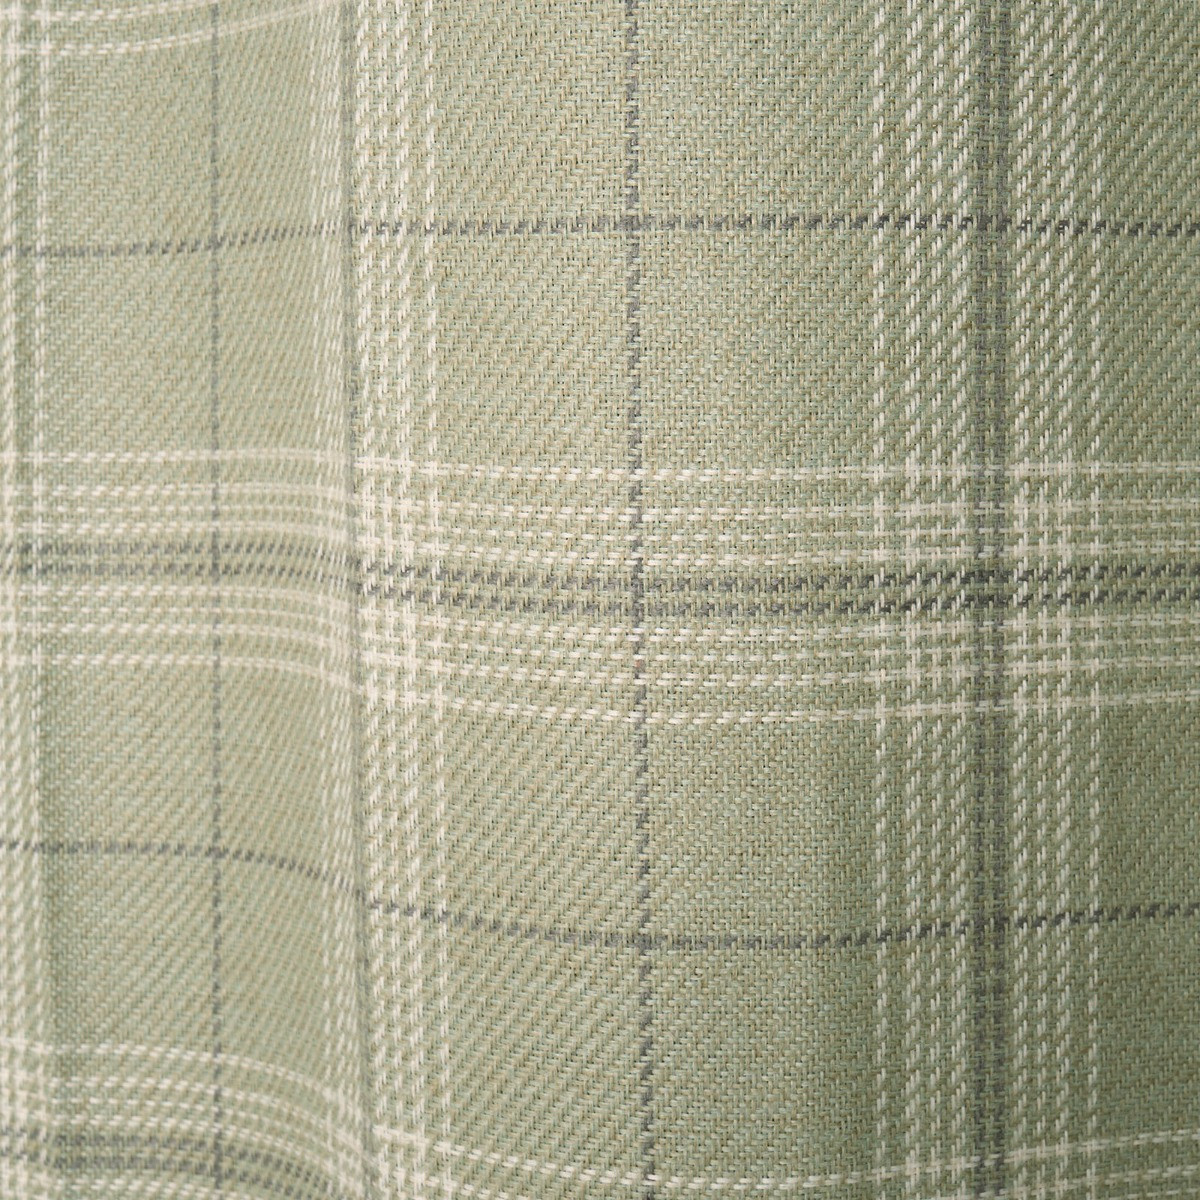 OHS Woven Check Eyelet Curtains - Sage>